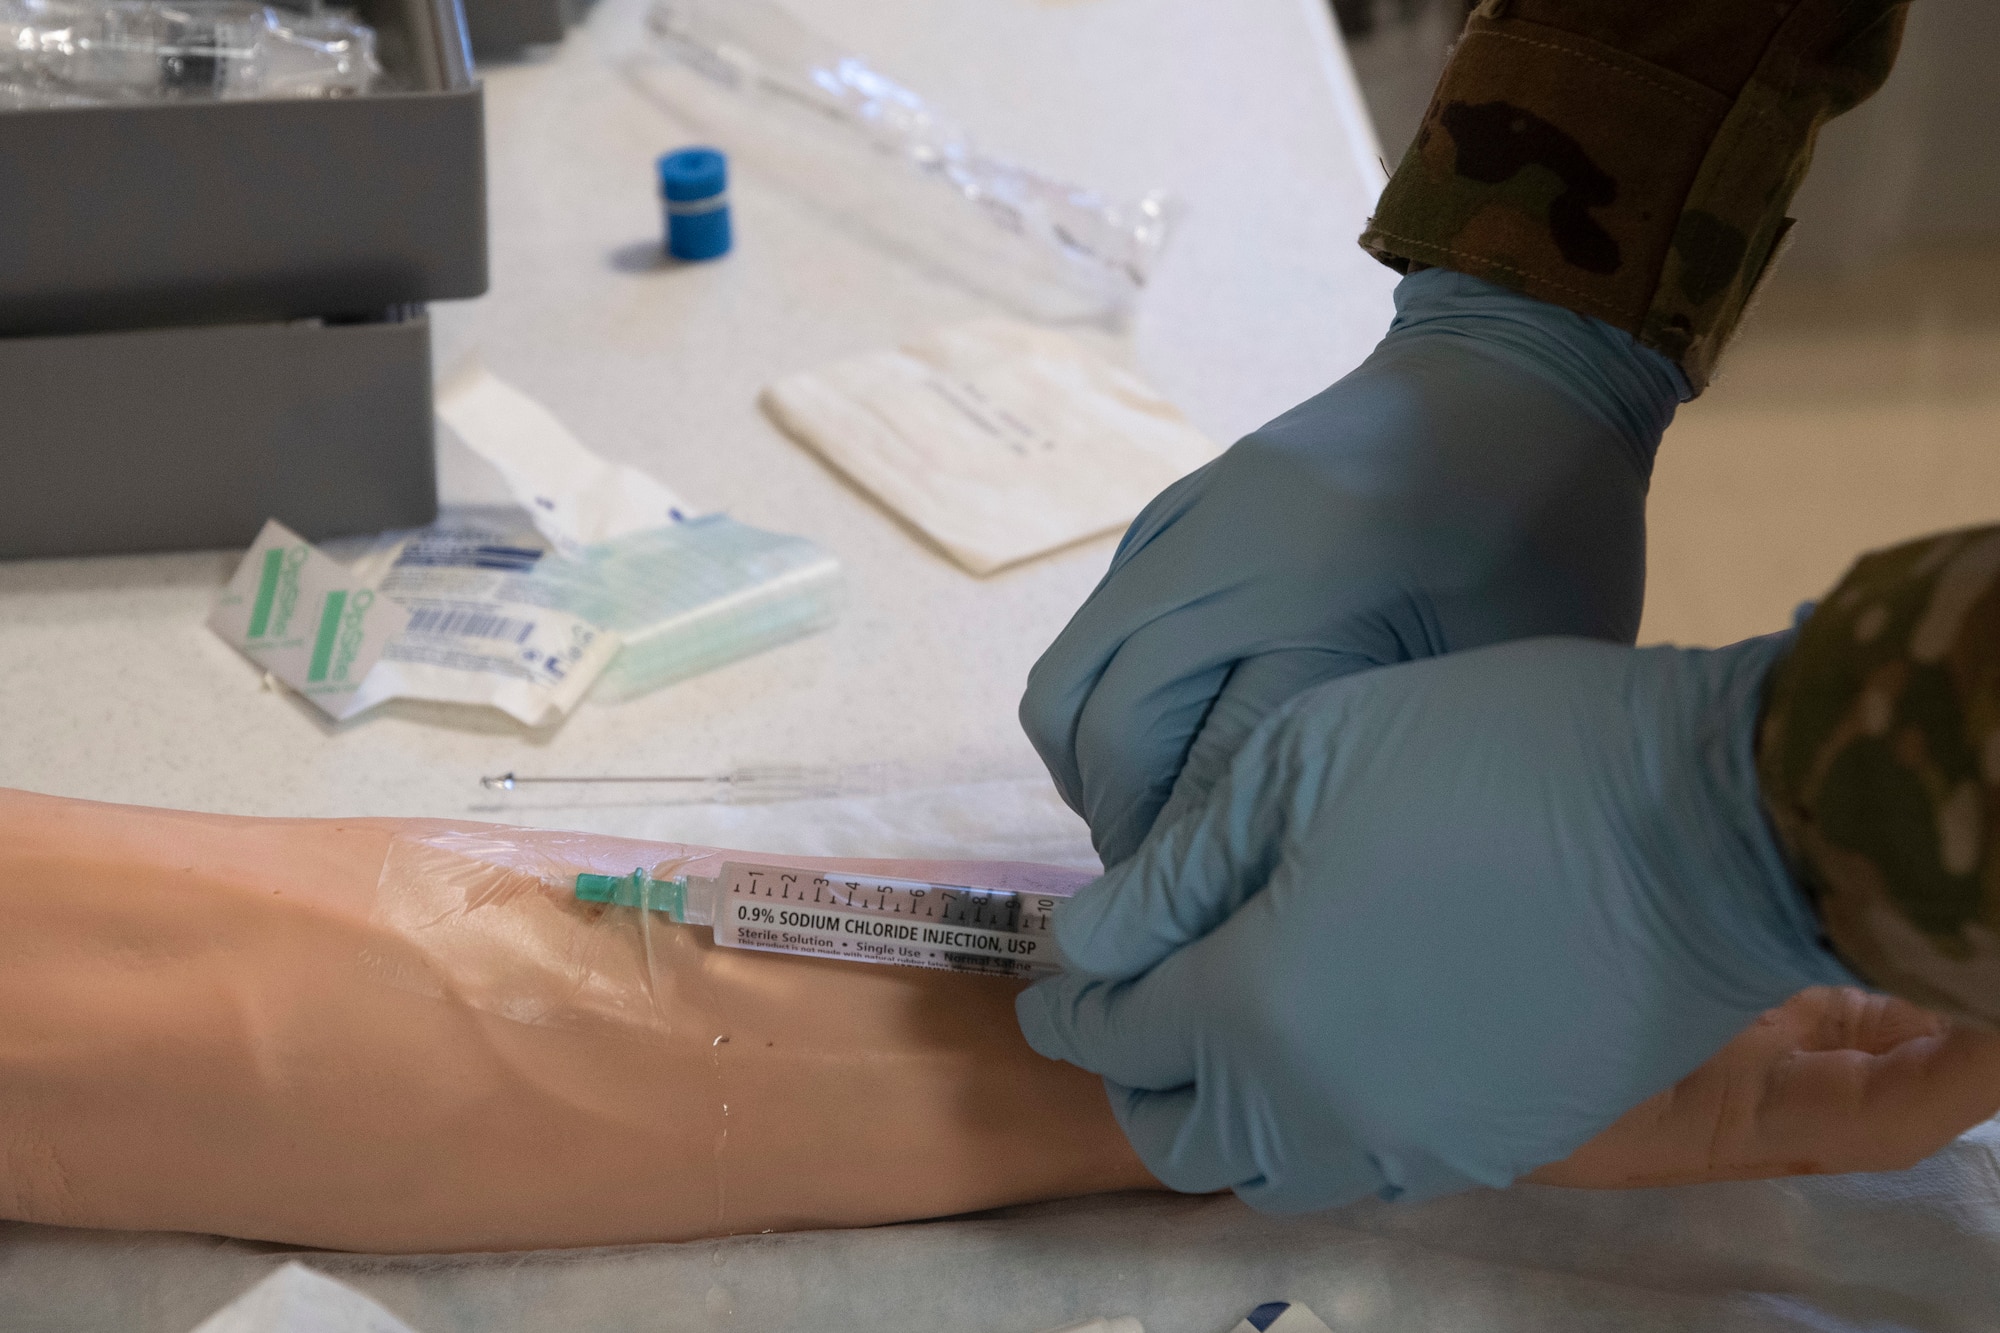 An airman sticks a needle into a prosthetic arm as a part of training.